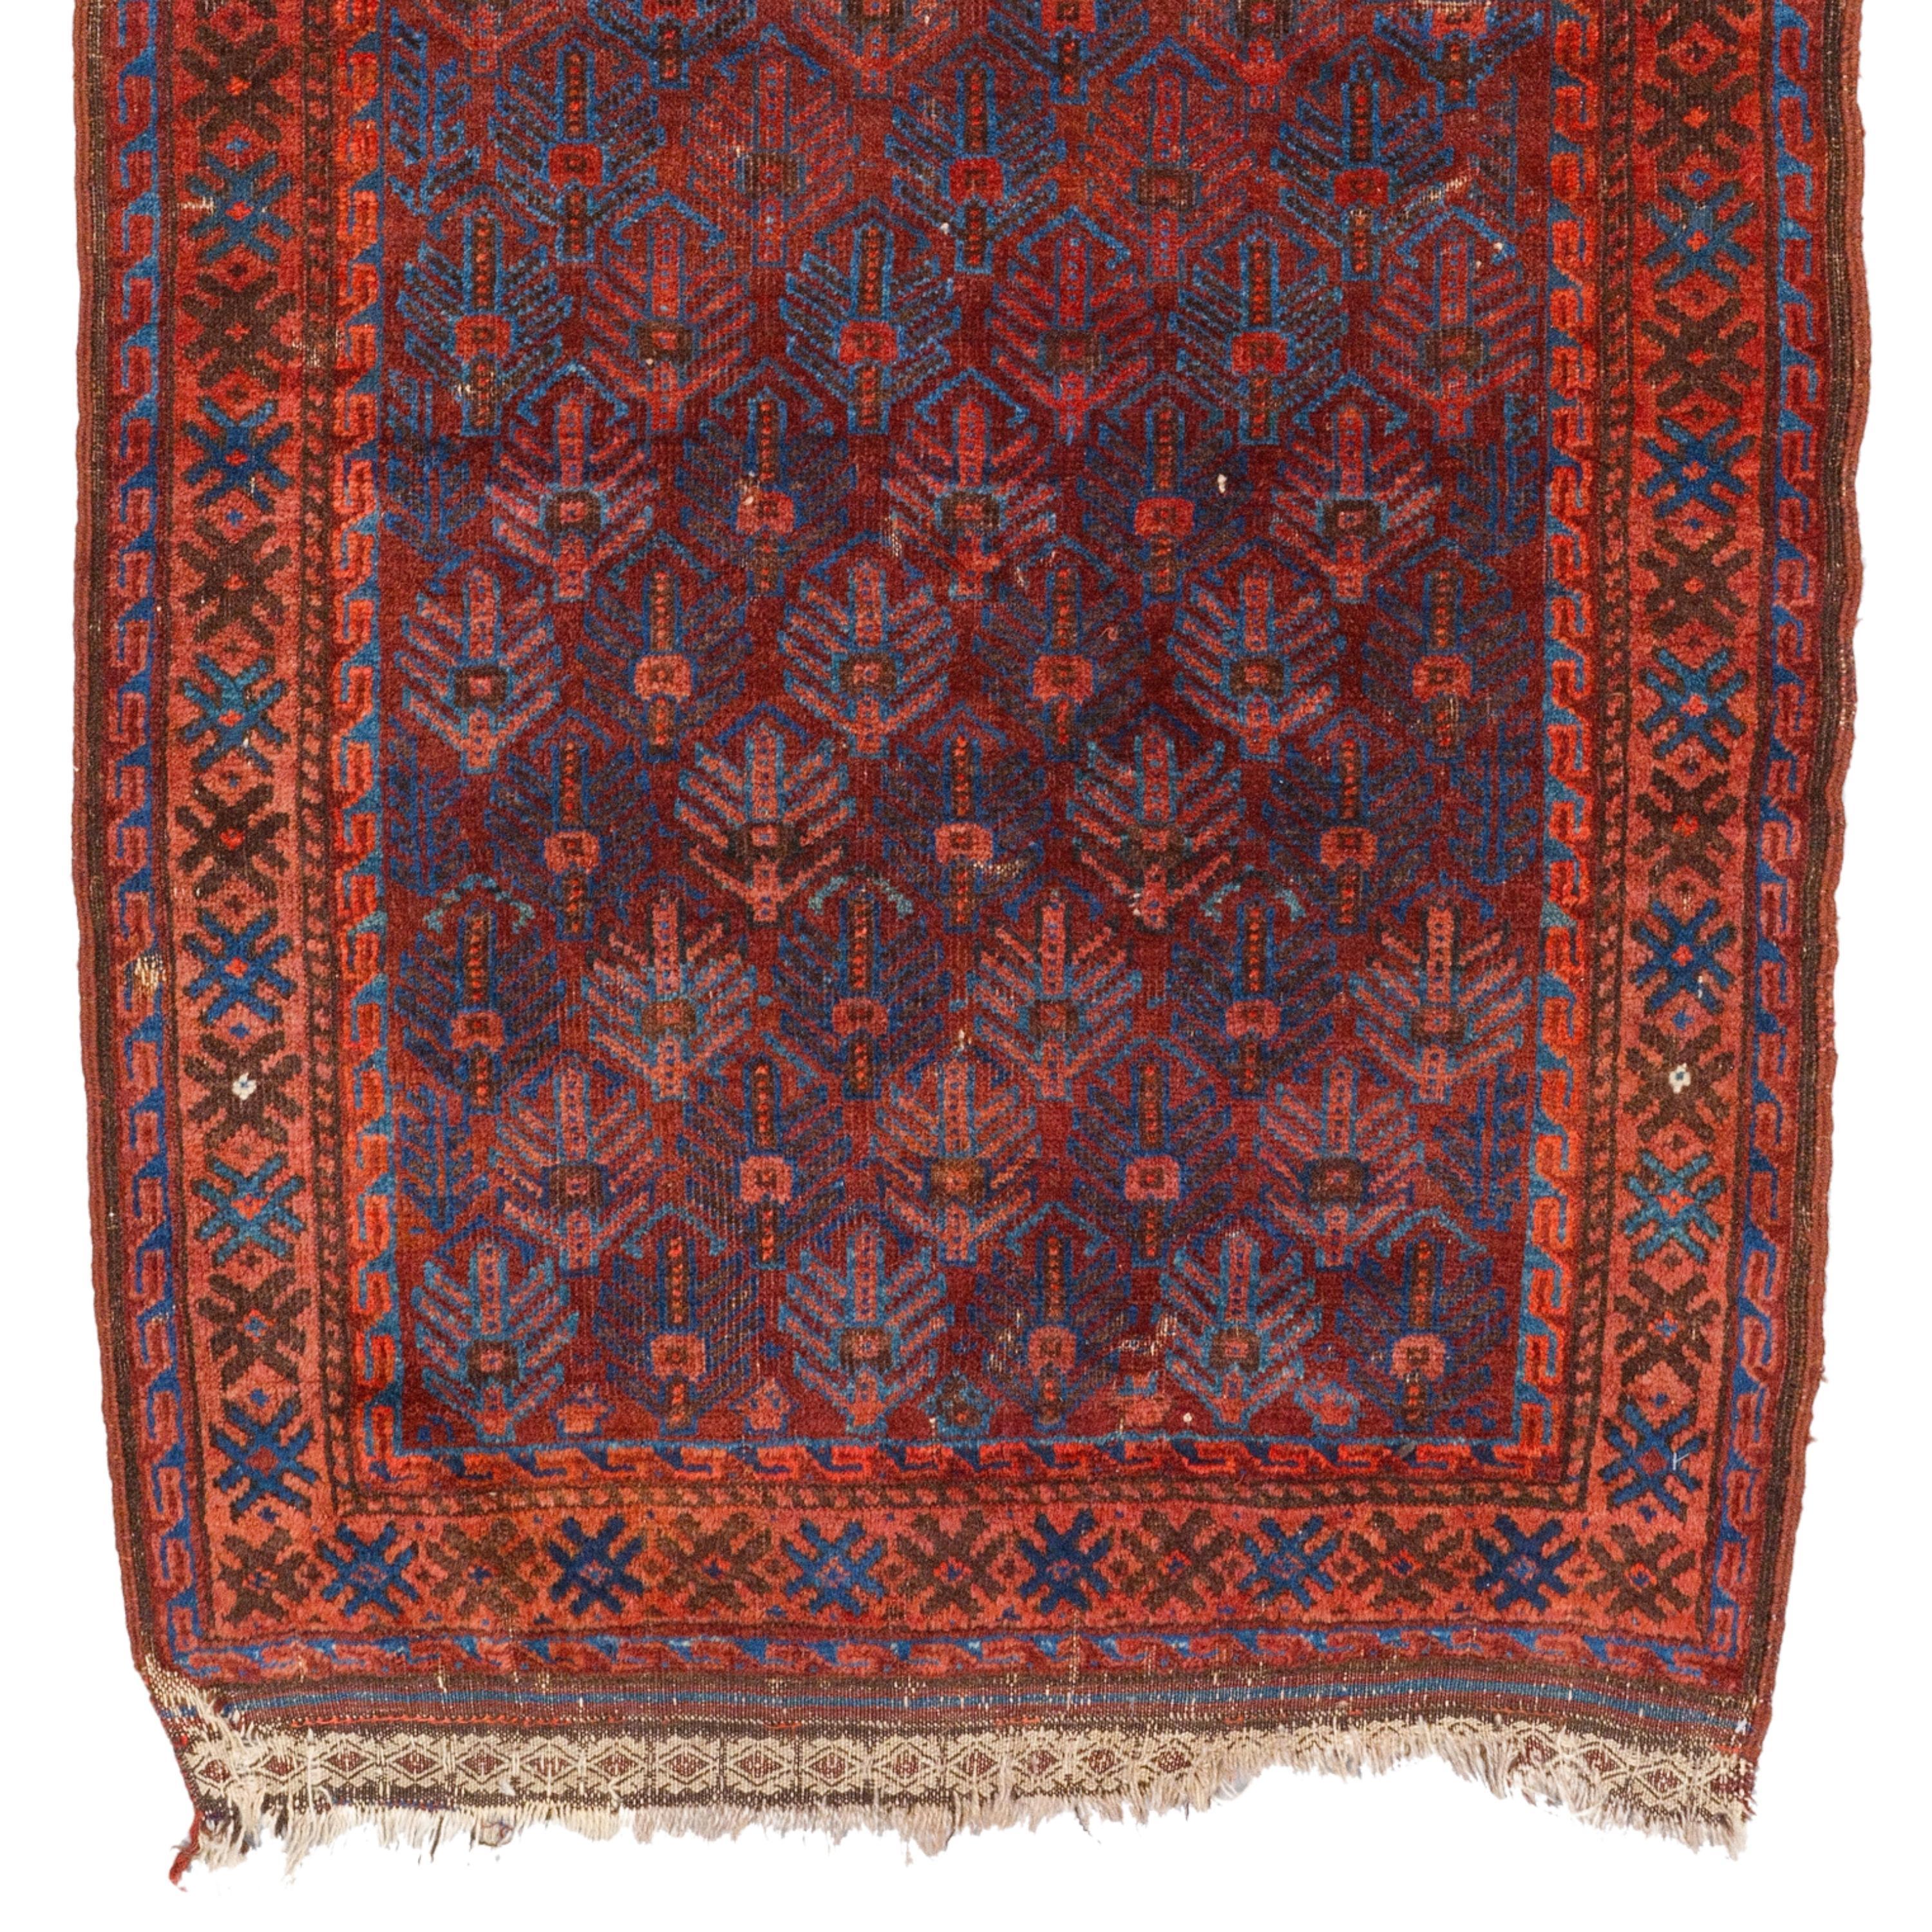 19th Century Turkmen Baluch Prayer Rug  Antique Rug
Size 95 x 140  cm (3,11x4,59 In)

This Turkmen Baluch carpet is a work of art woven in Turkmenistan in the 19th century. This carpet, dominated by dark red color, has geometric patterns enriched